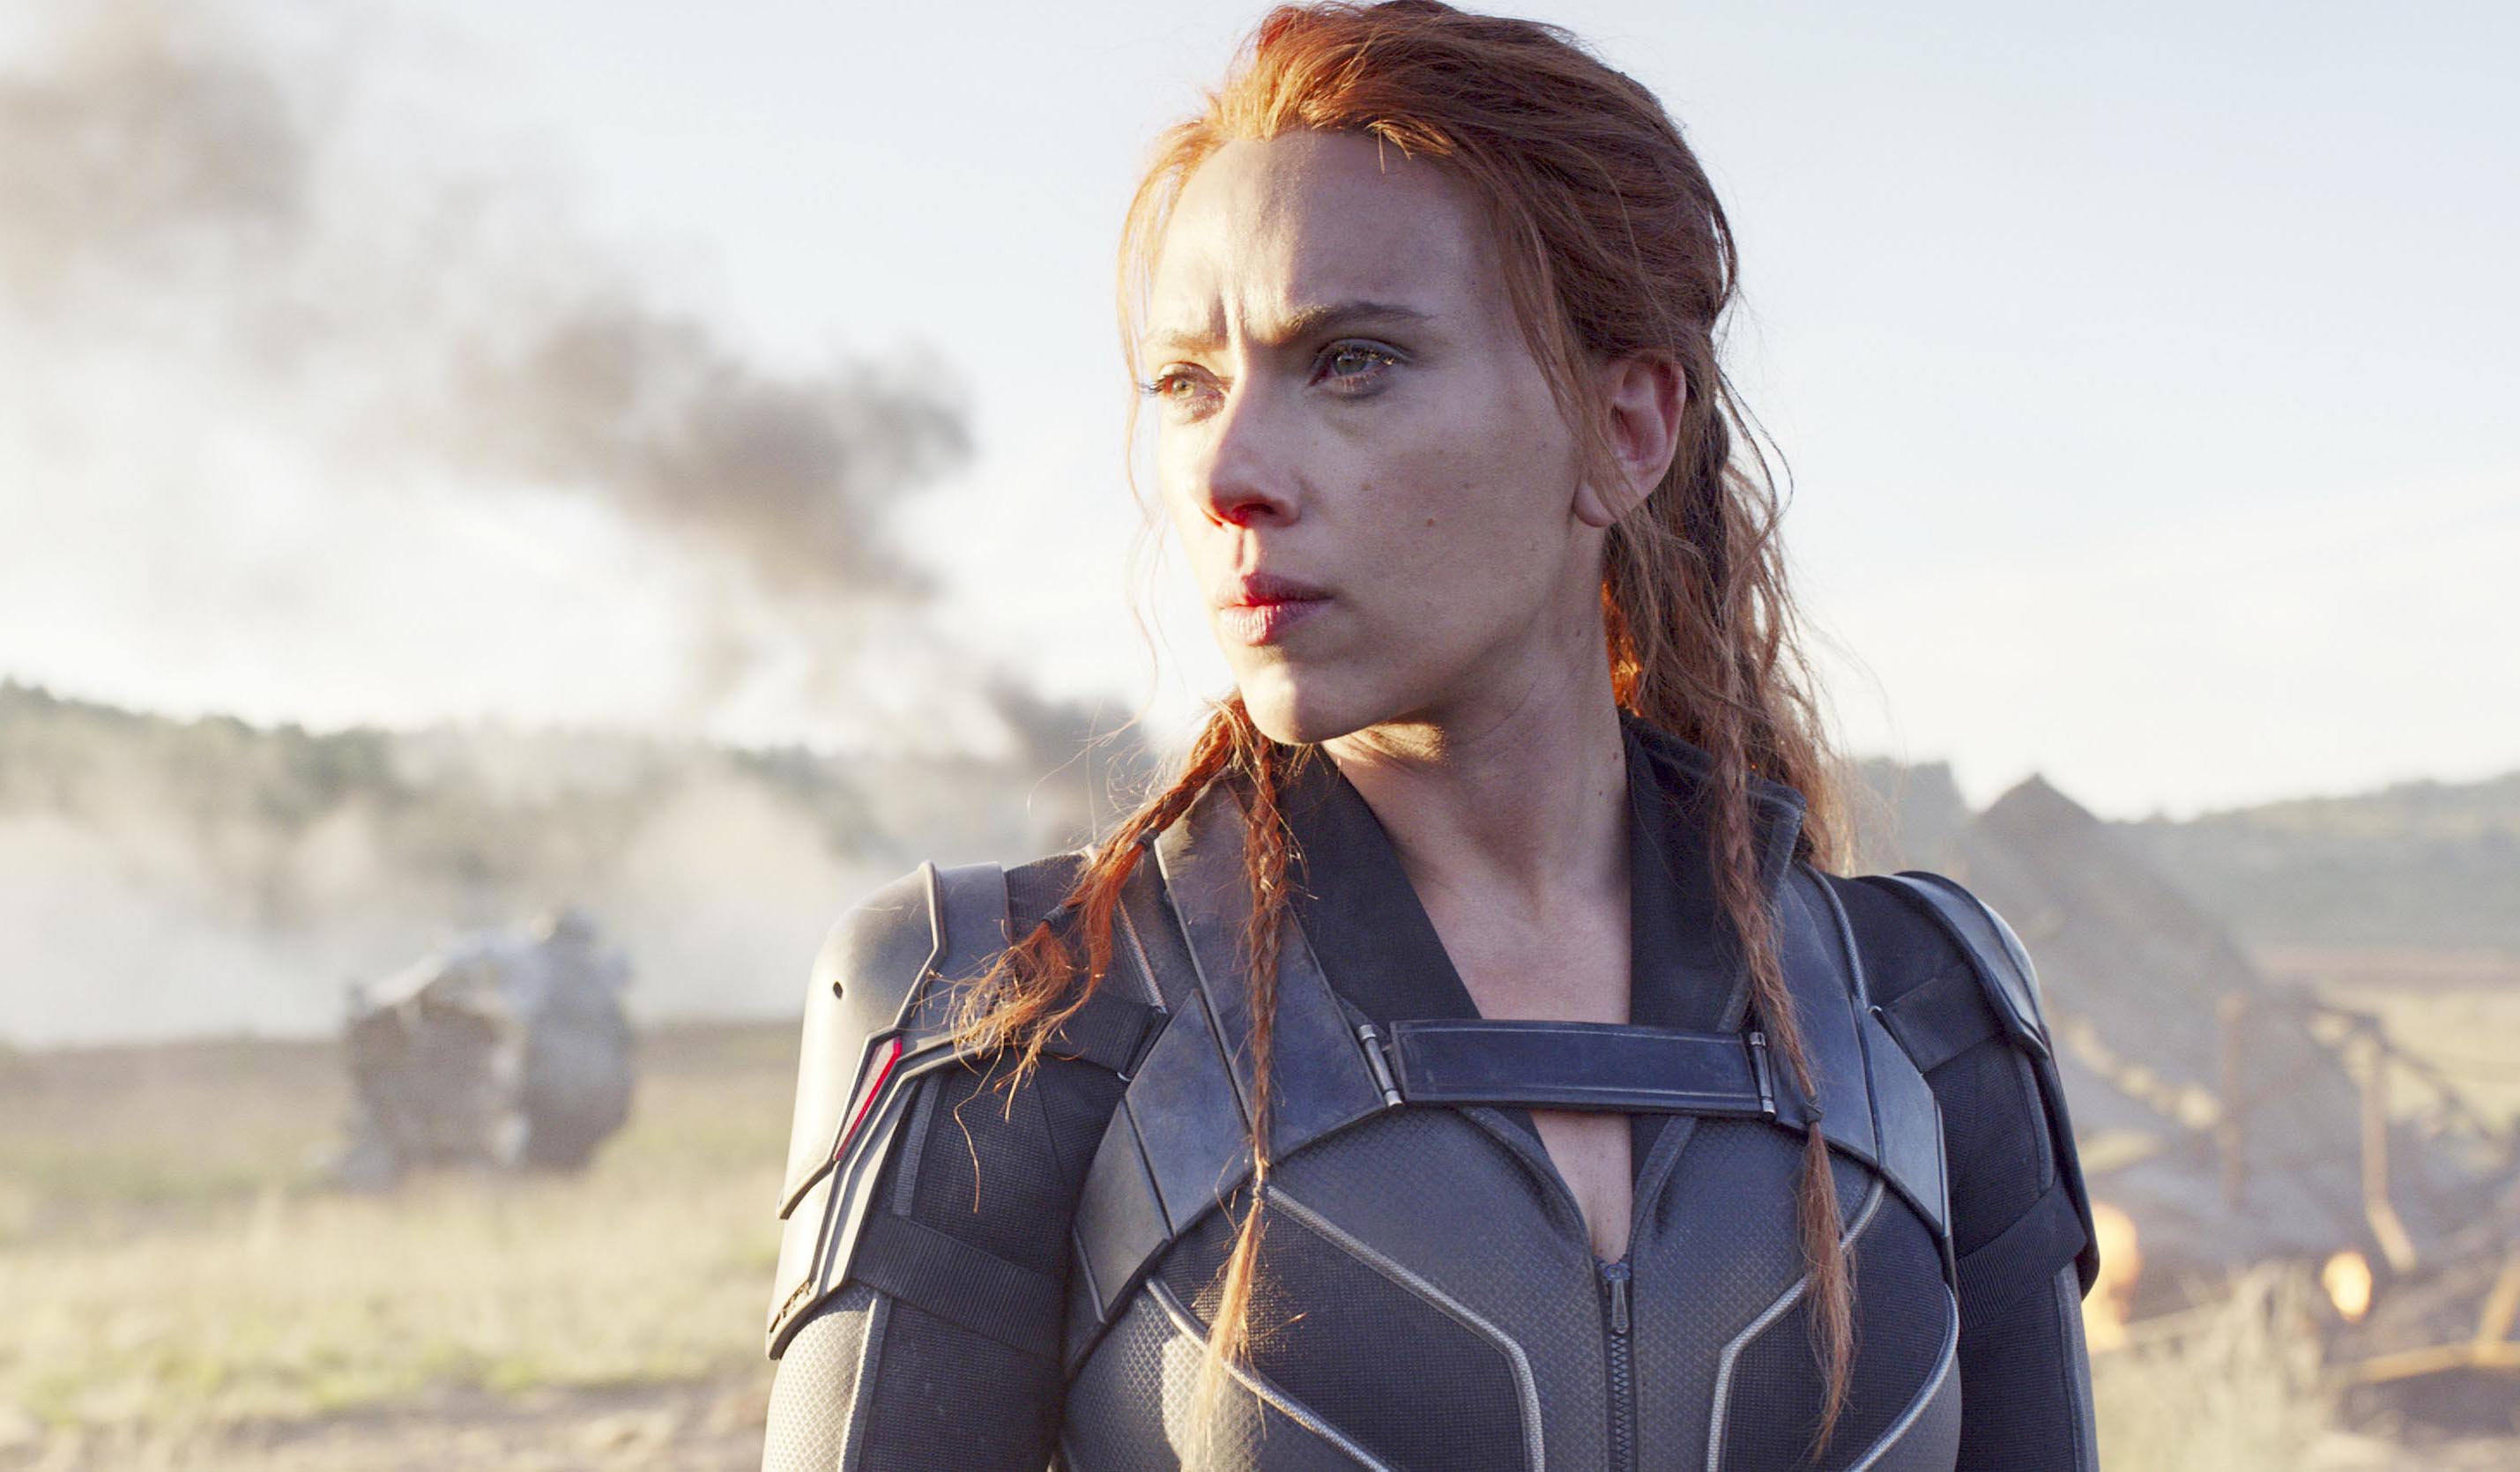 New Black Widow photos are extremely revealing